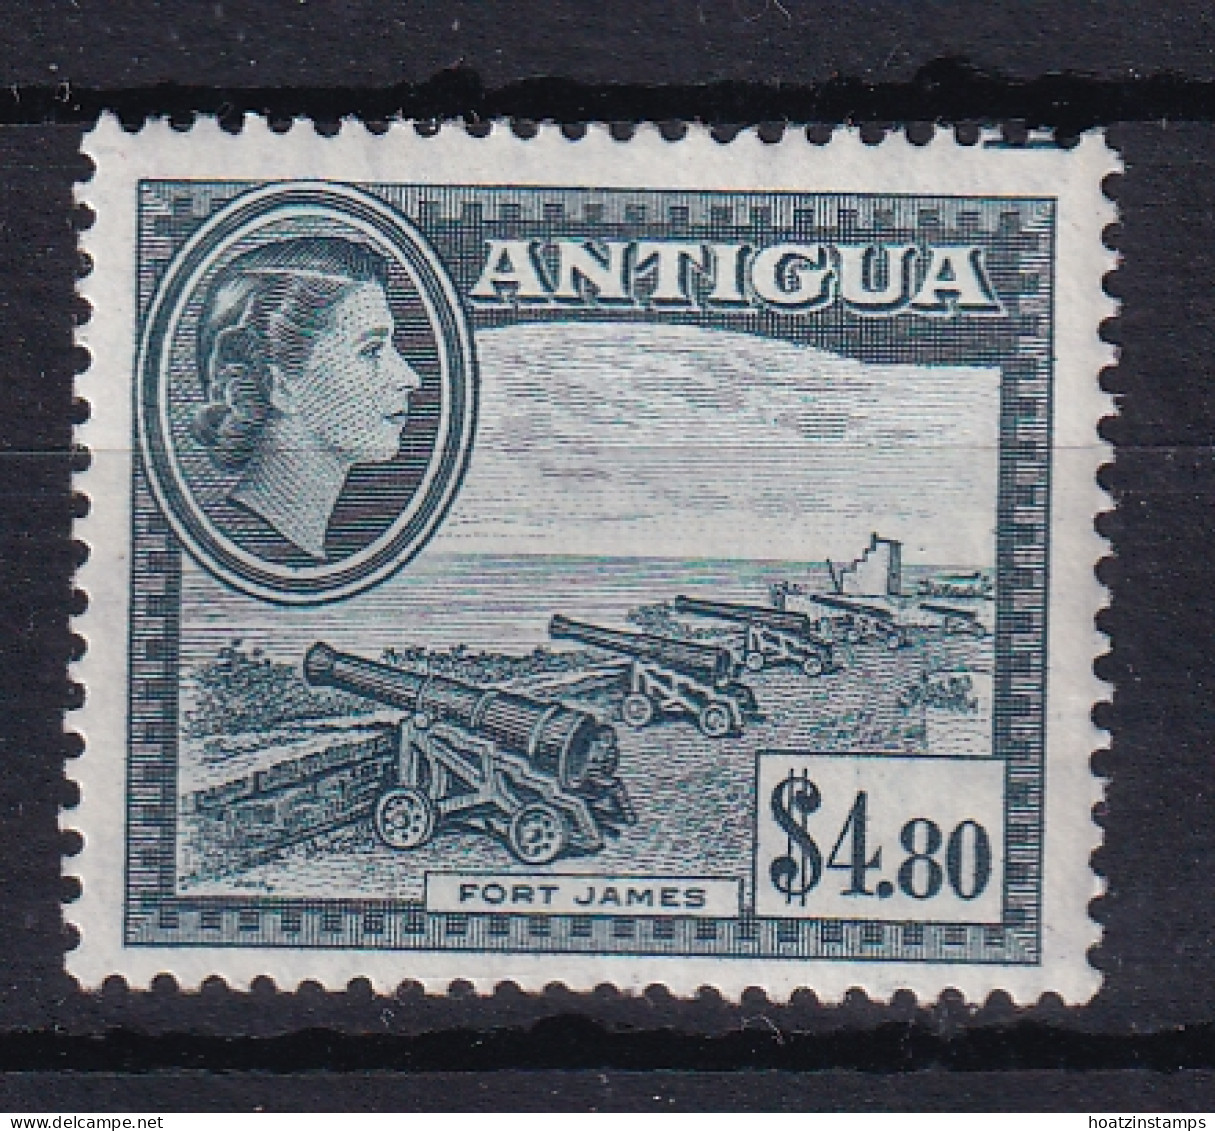 Antigua: 1953/62   QE II - Pictorial     SG134    $4.80      MH - 1858-1960 Crown Colony